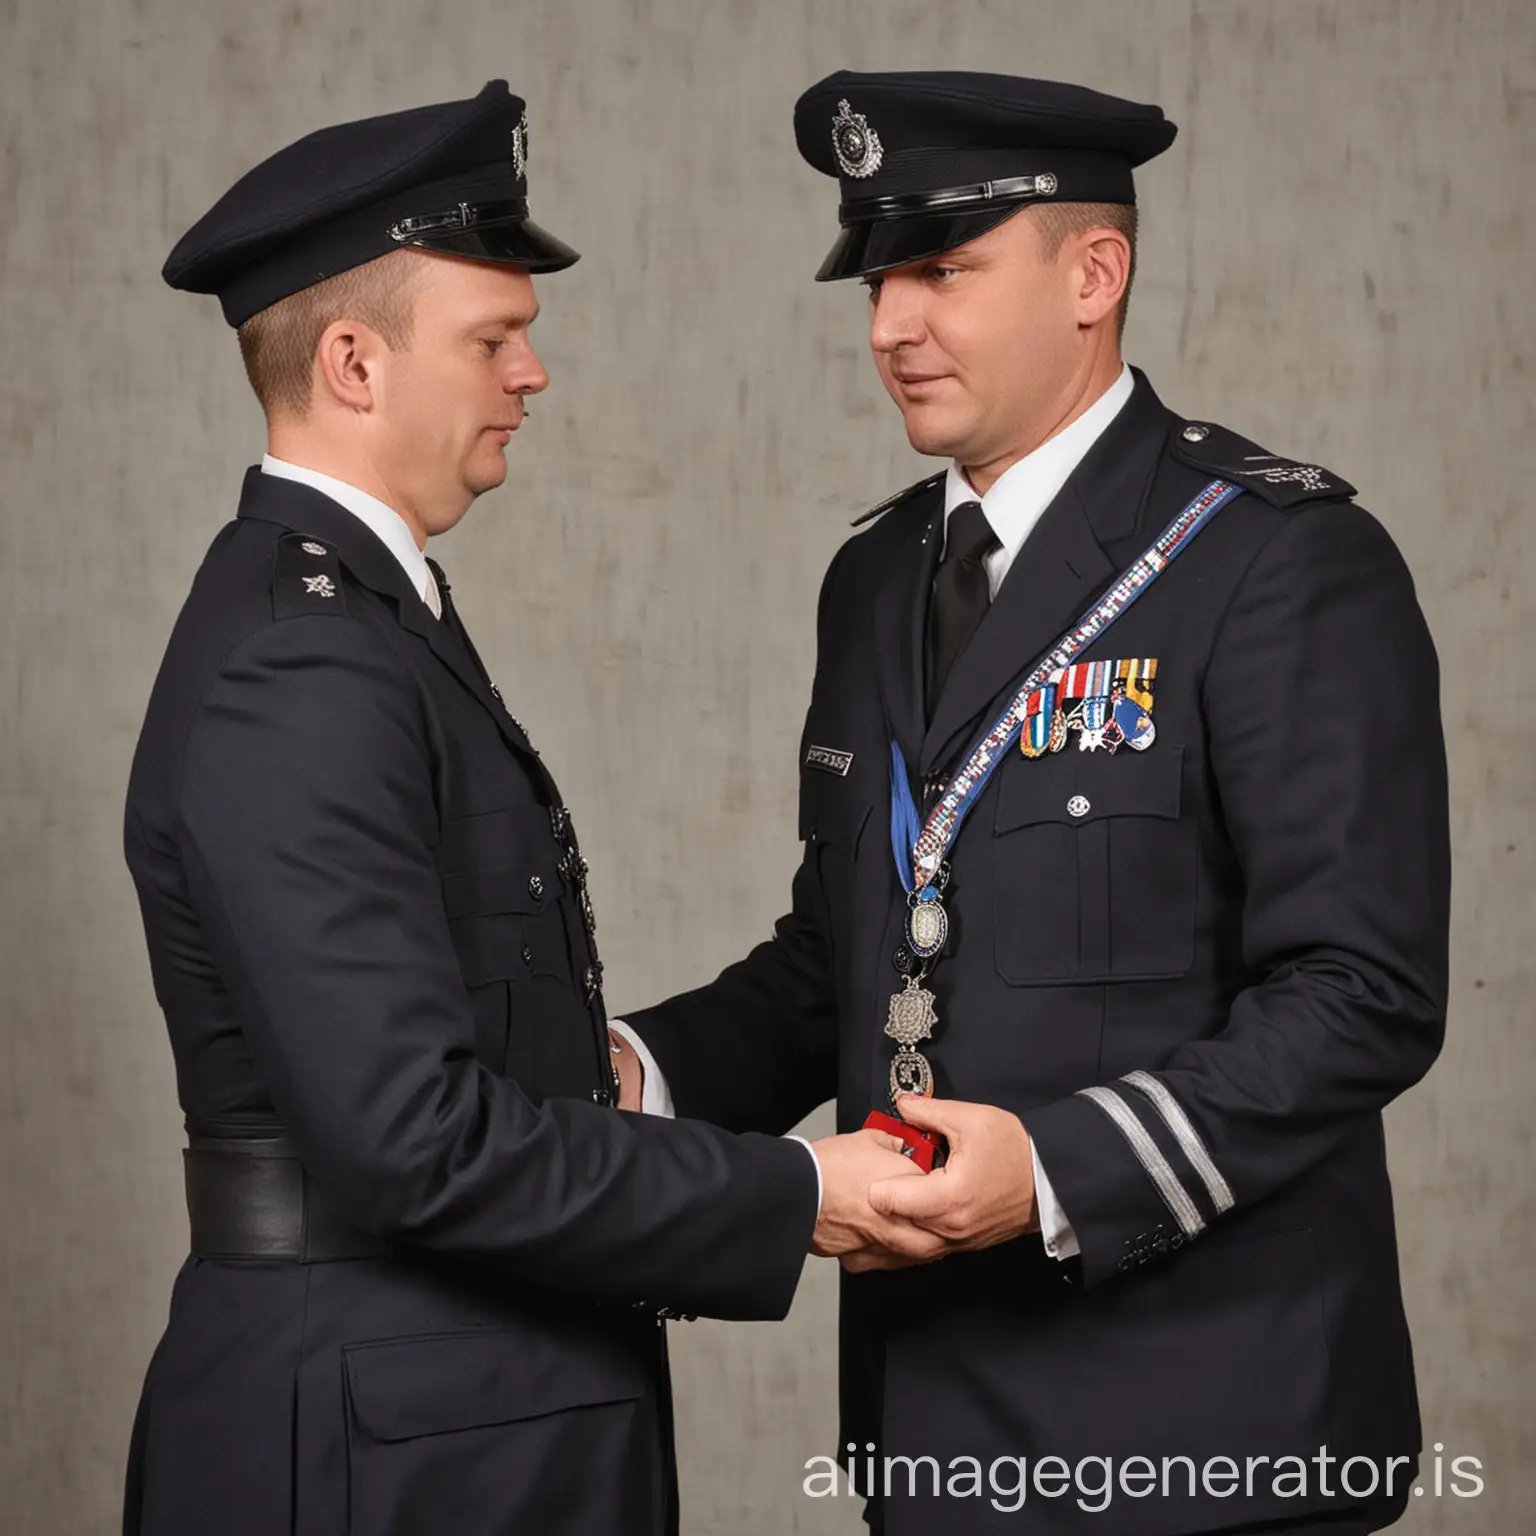 Police-Officer-Receiving-Medal-at-Ranking-Ceremony